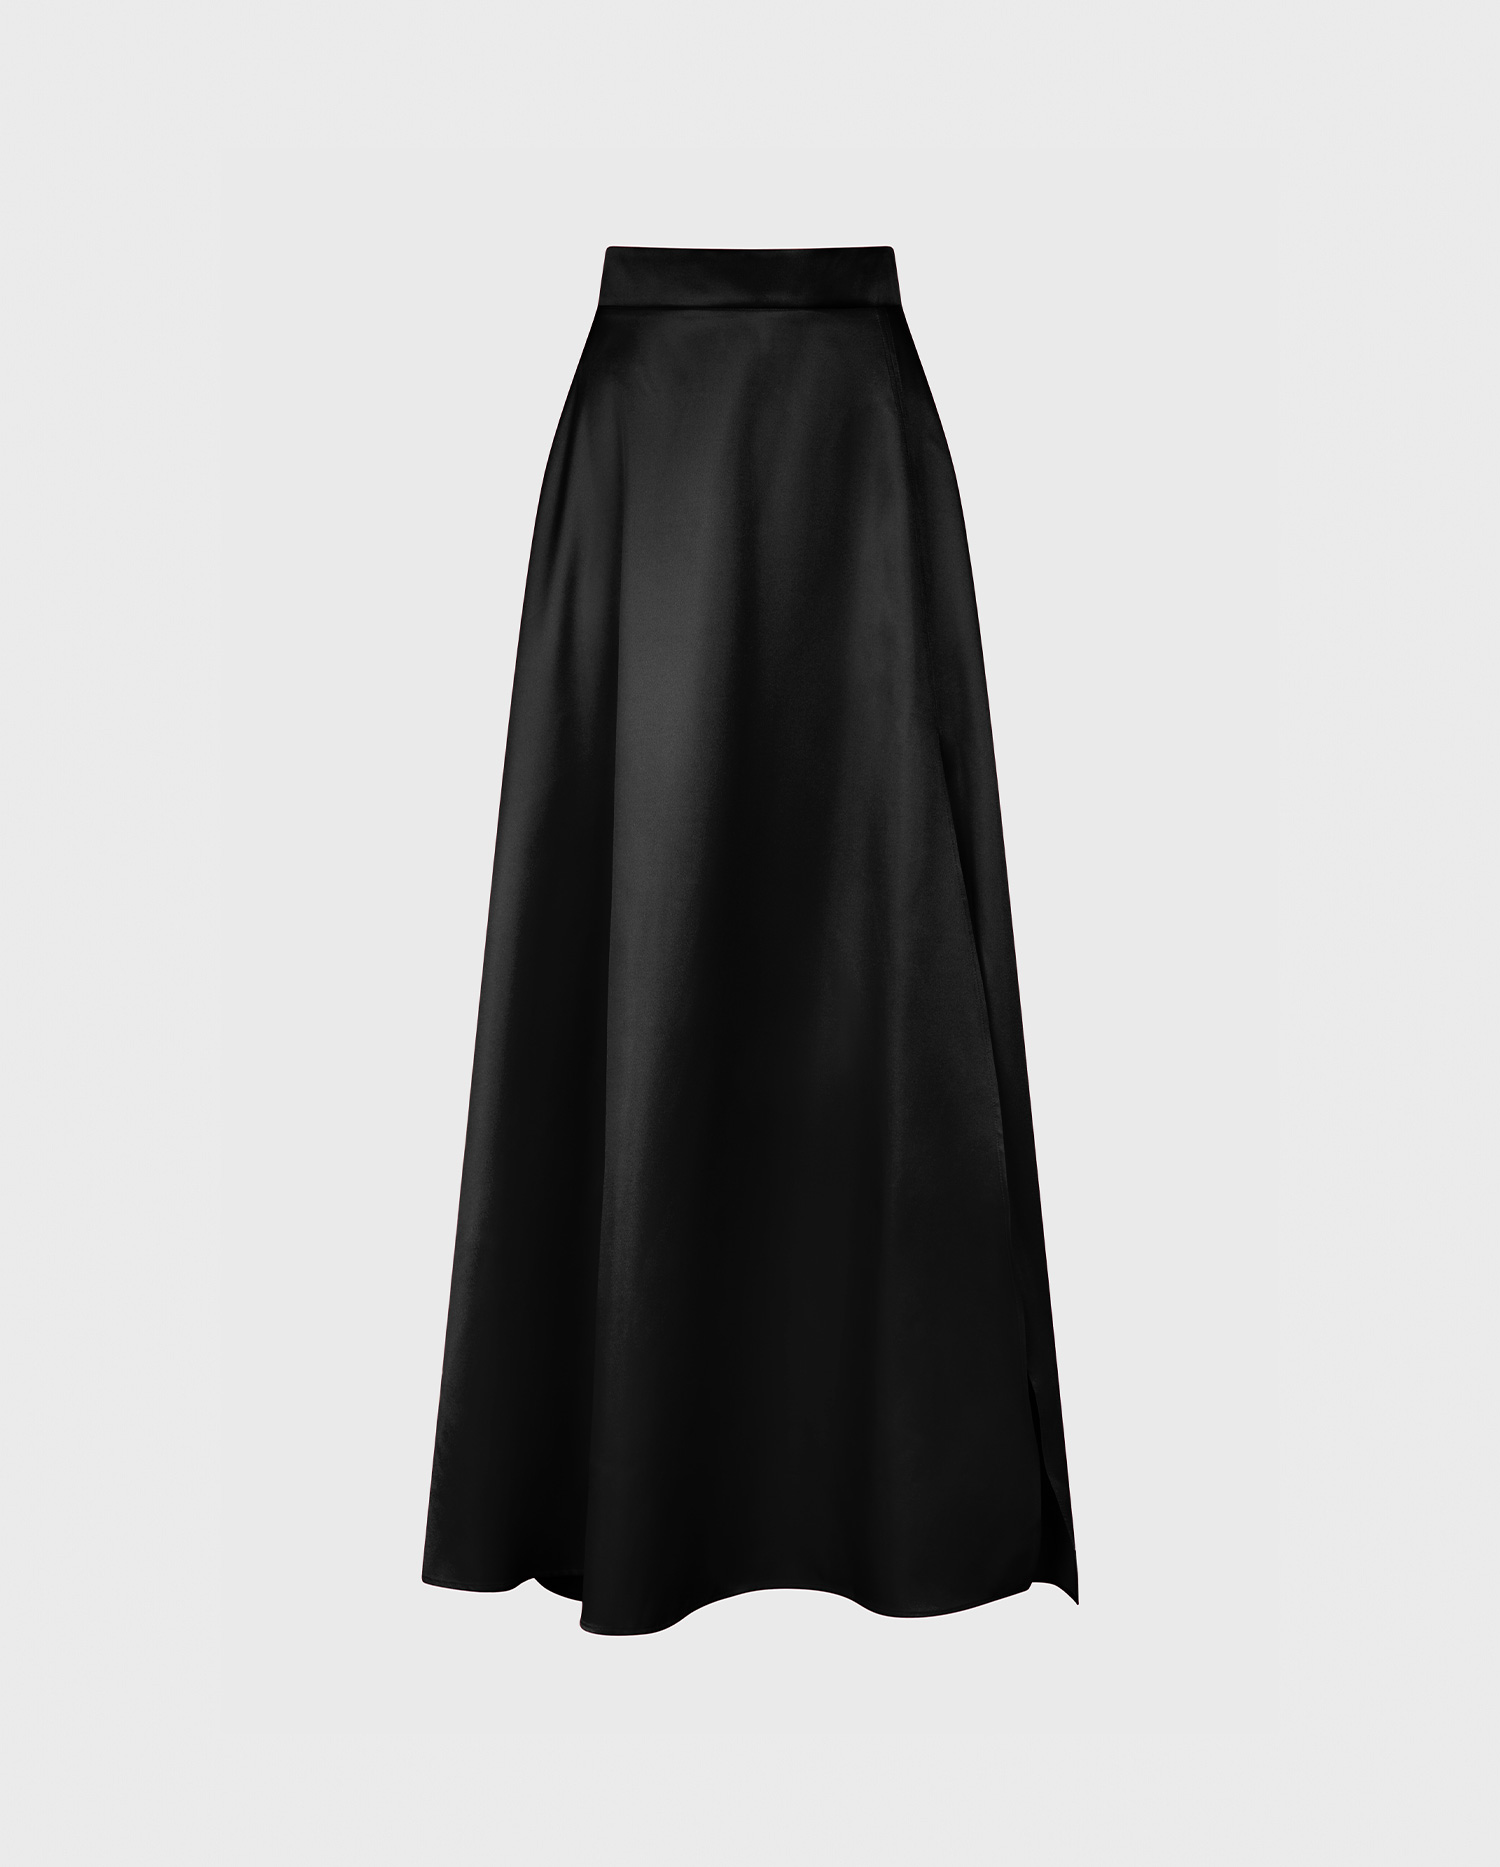 Discover The JOYCE black satin full skirt from ANNE FONTAINE